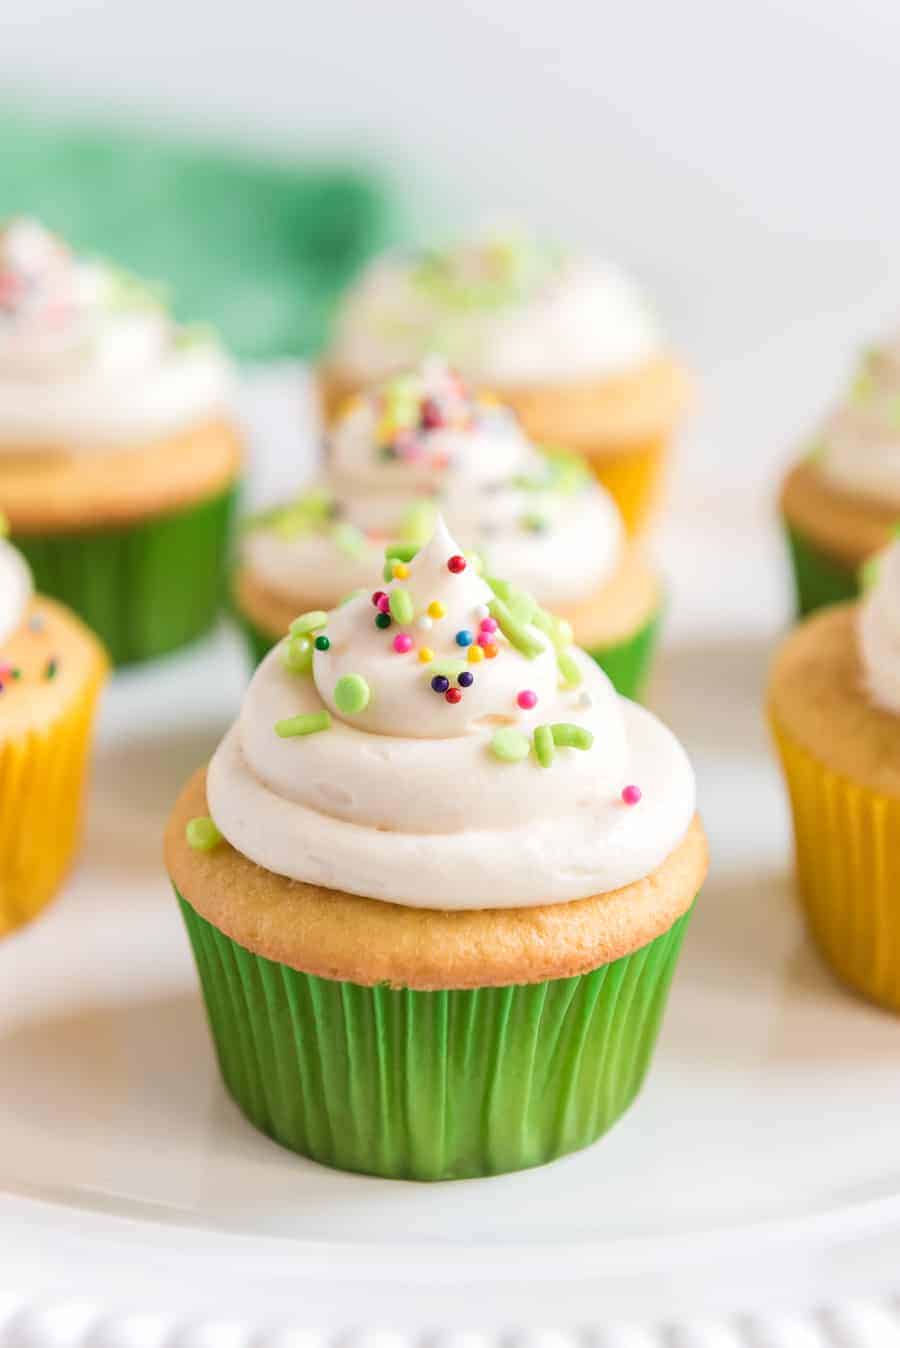 Up close shot of a cupcake that has been iced with vanilla frosting and a variety of sprinkles.